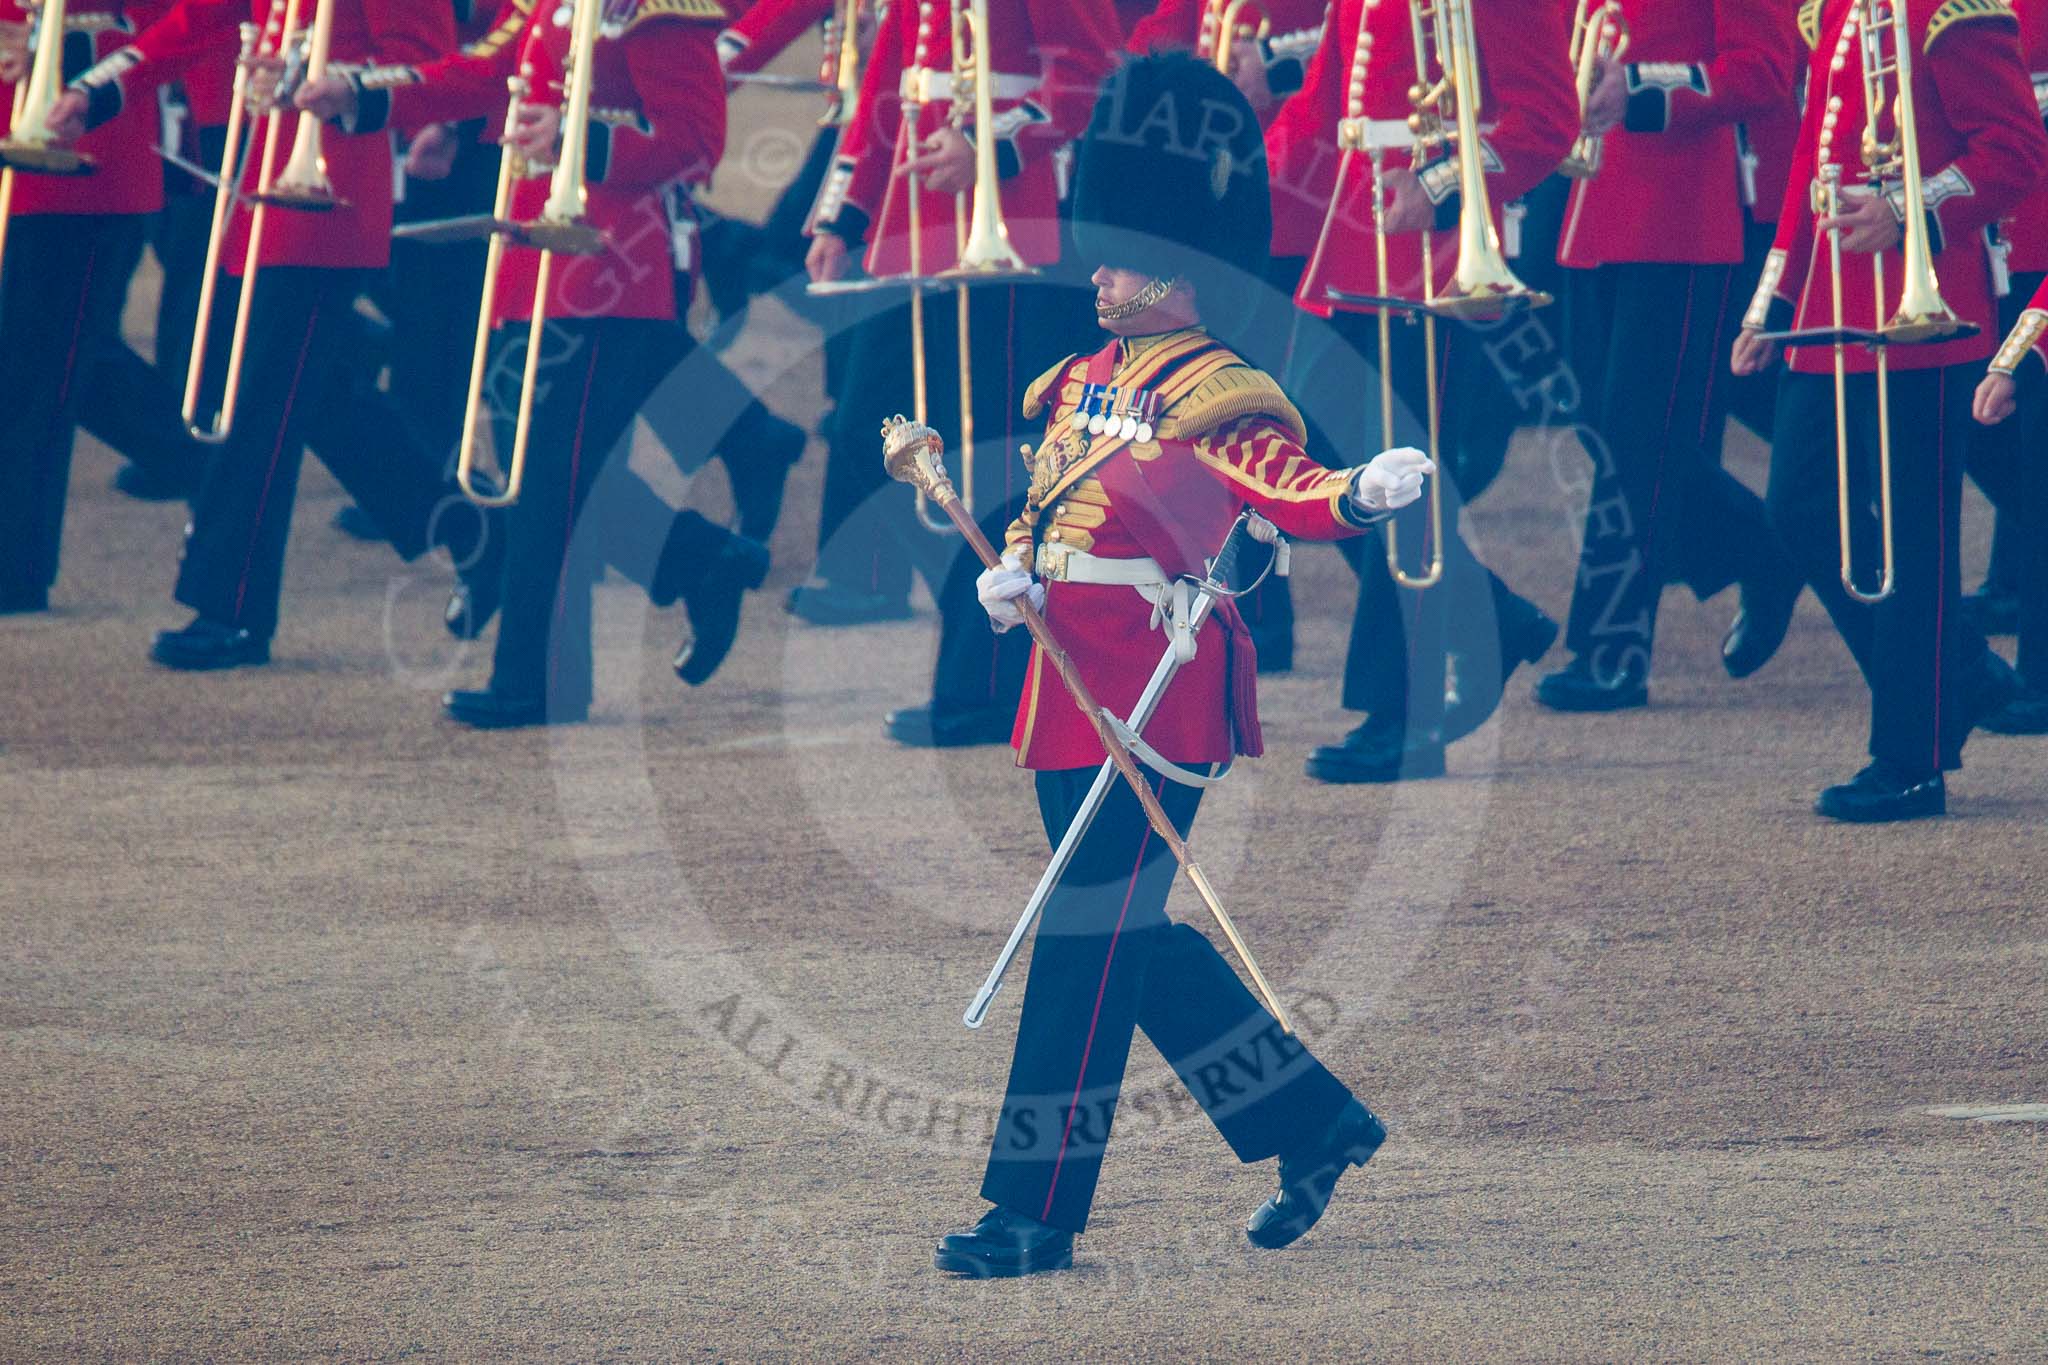 Beating Retreat 2014.
Horse Guards Parade, Westminster,
London SW1A,

United Kingdom,
on 11 June 2014 at 20:33, image #122